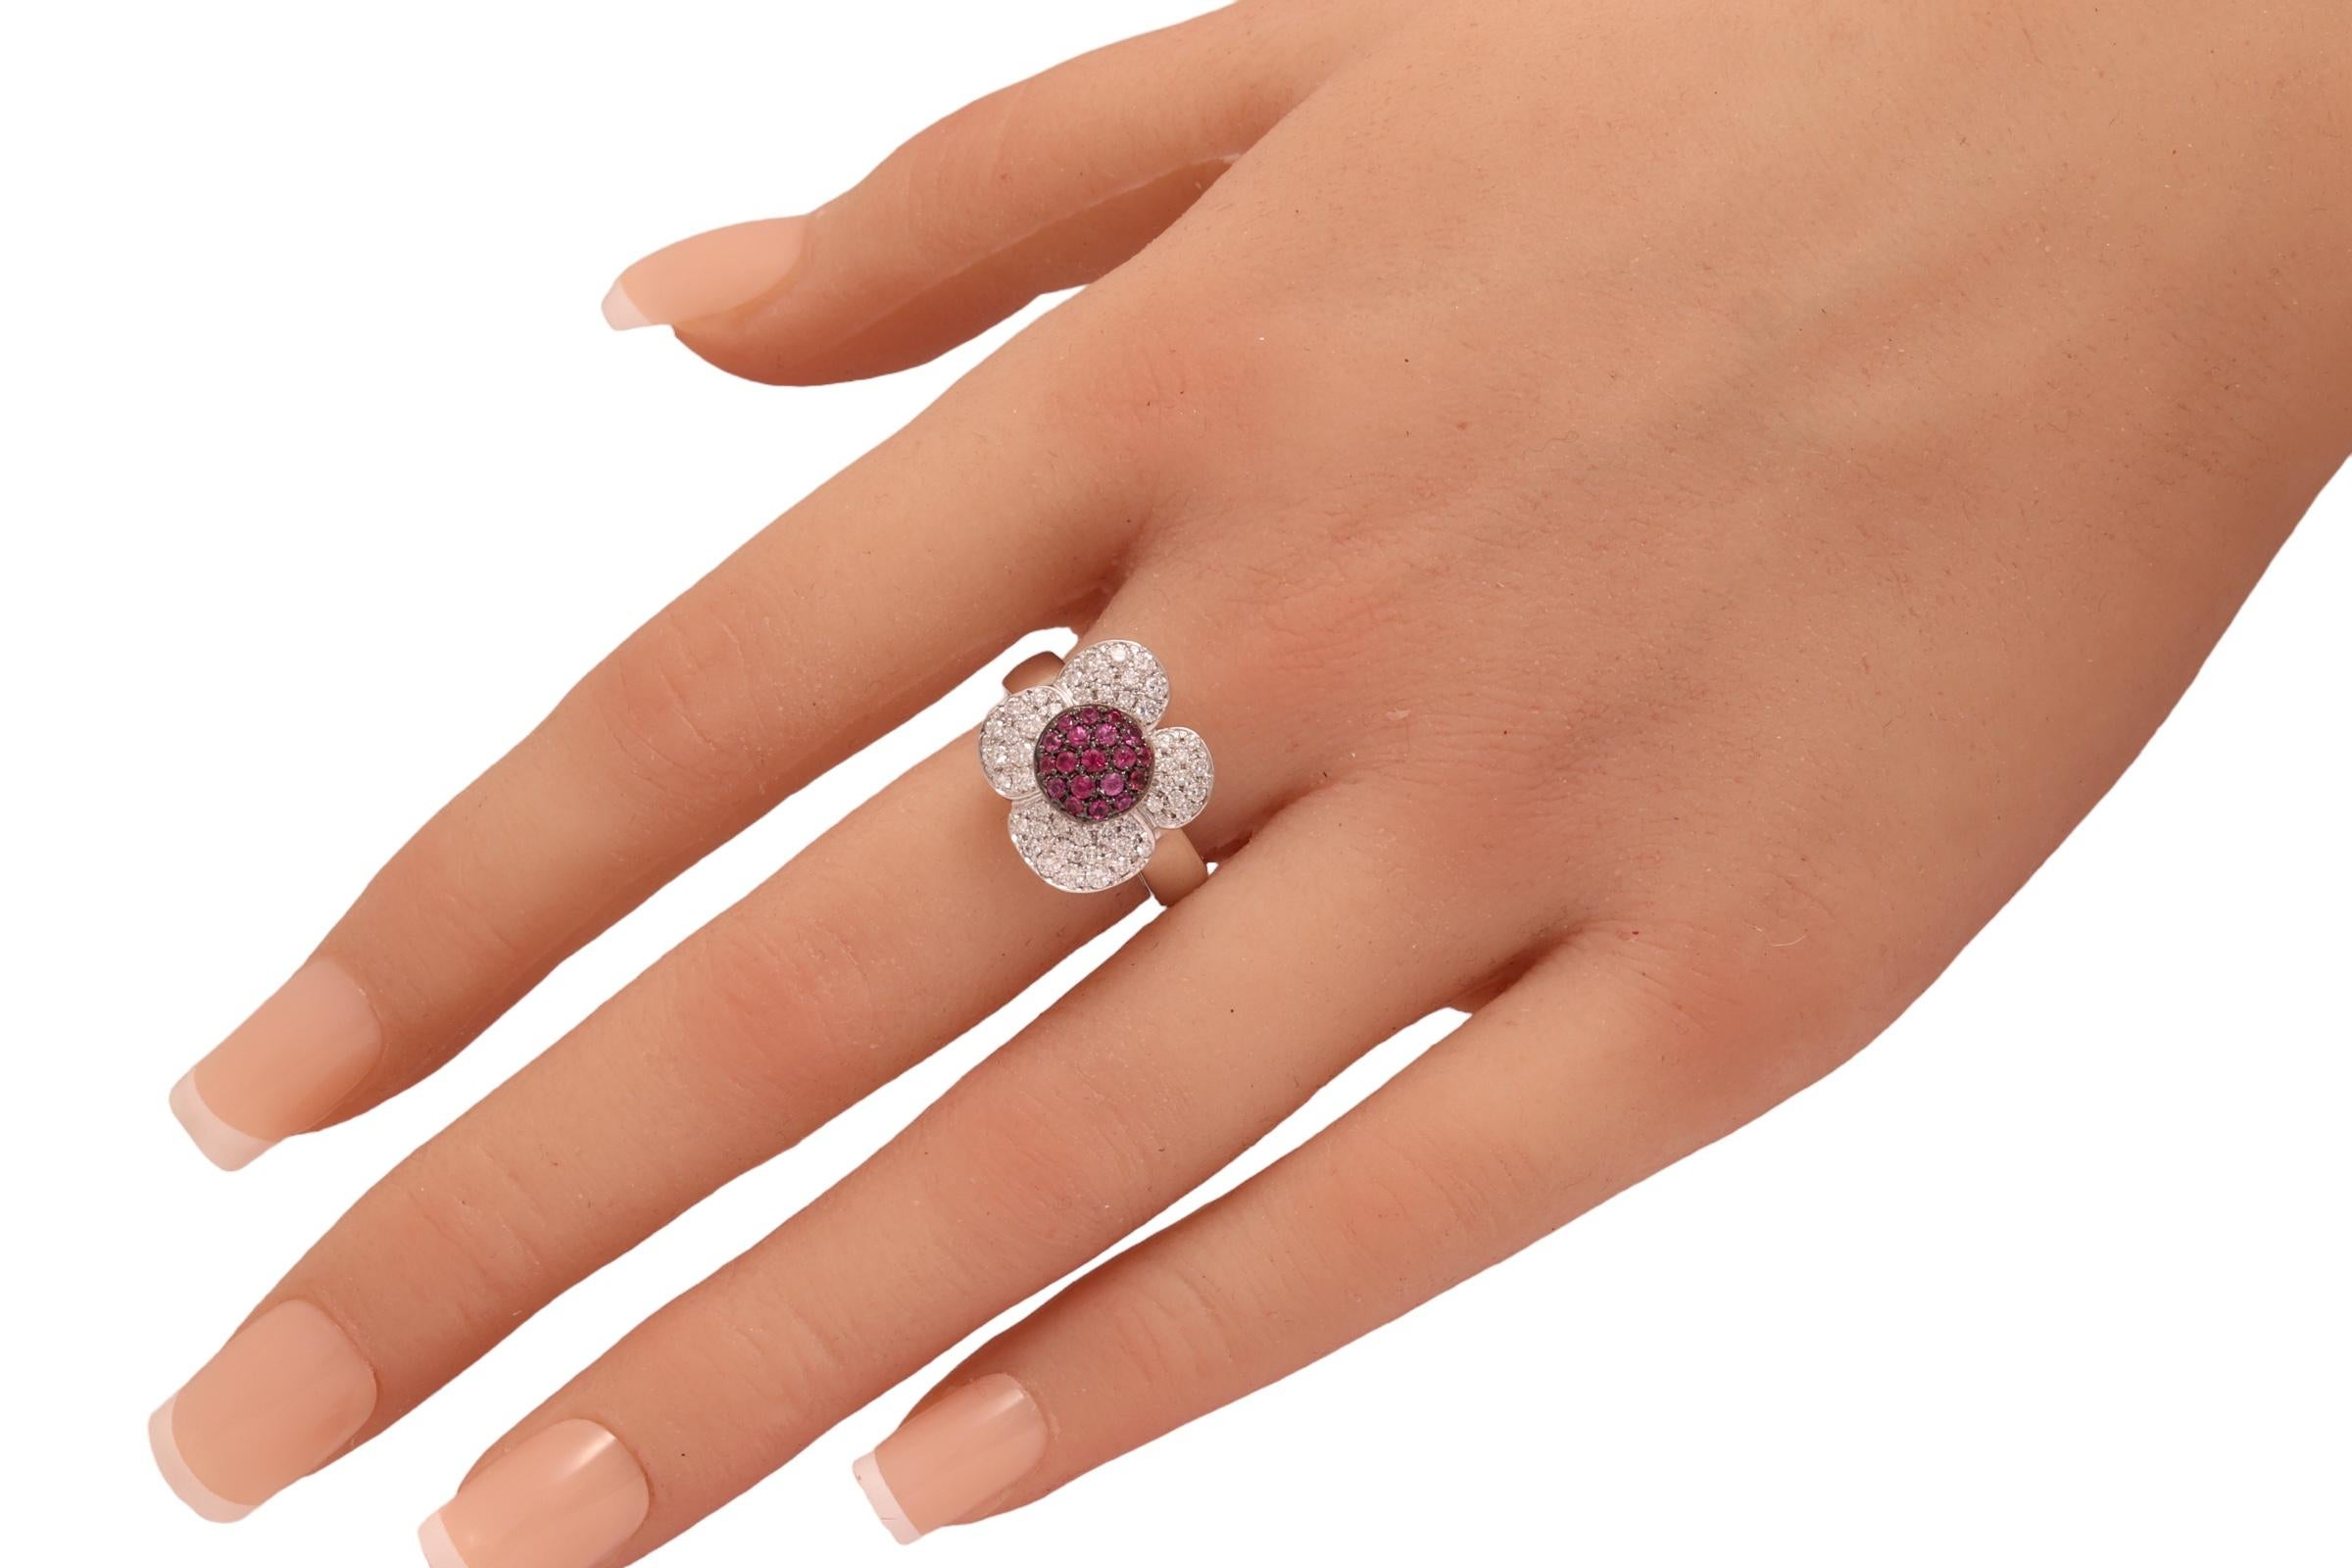  18 kt. White Gold Flower Shape Ring with 1 ct. Diamonds & 0.5 ct. Pink Sapphire For Sale 1